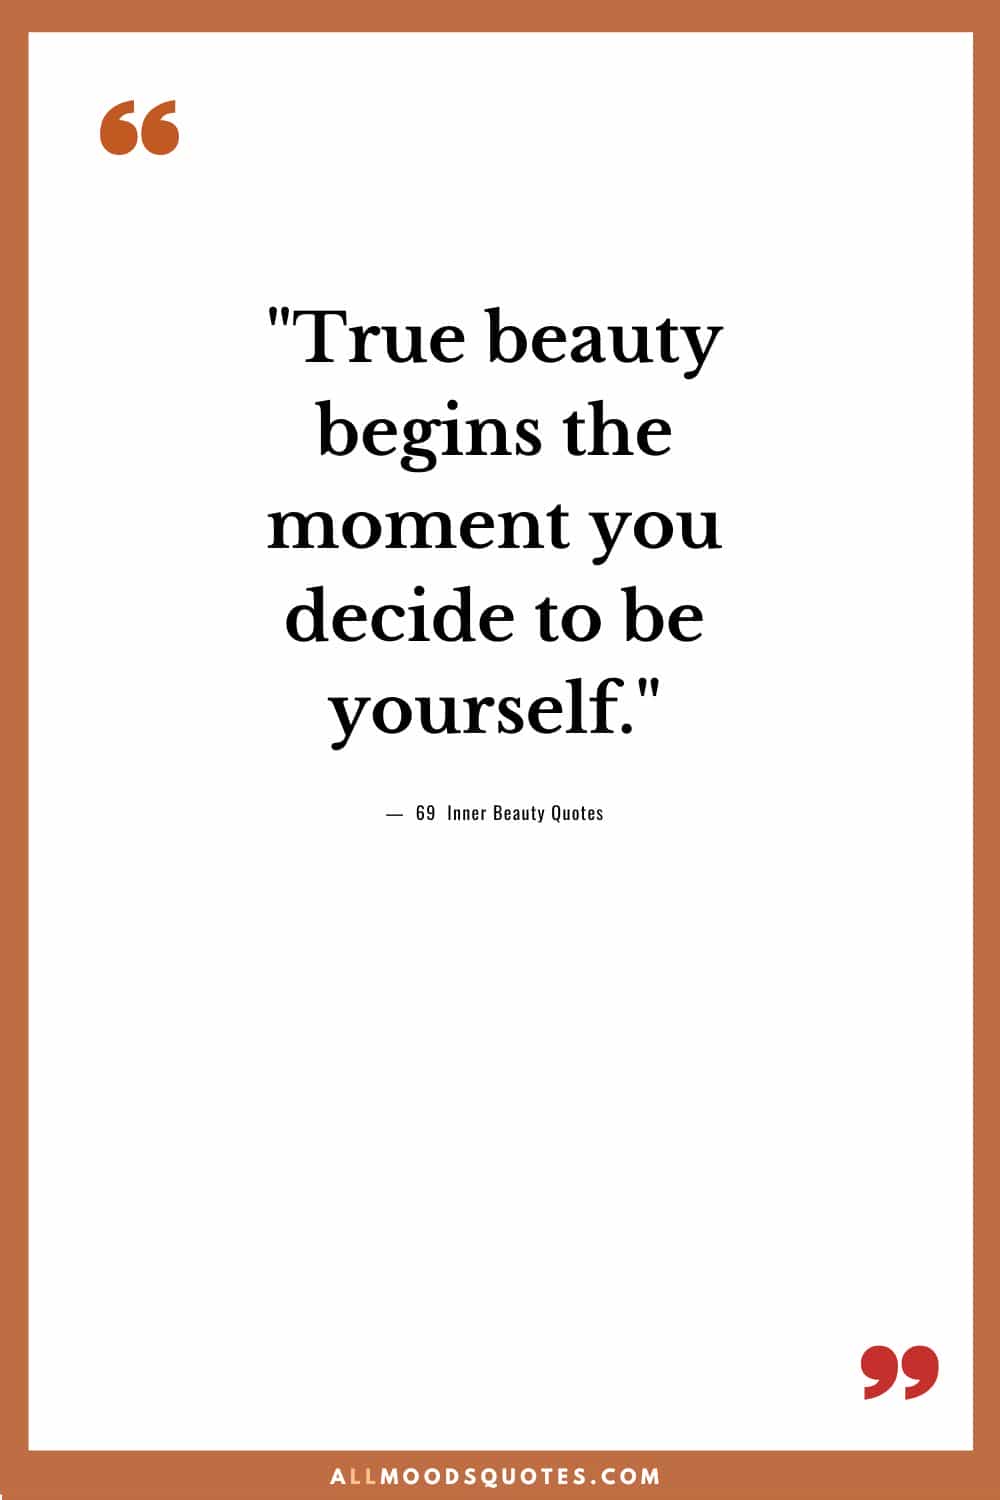 True beauty begins the moment you decide to be yourself.